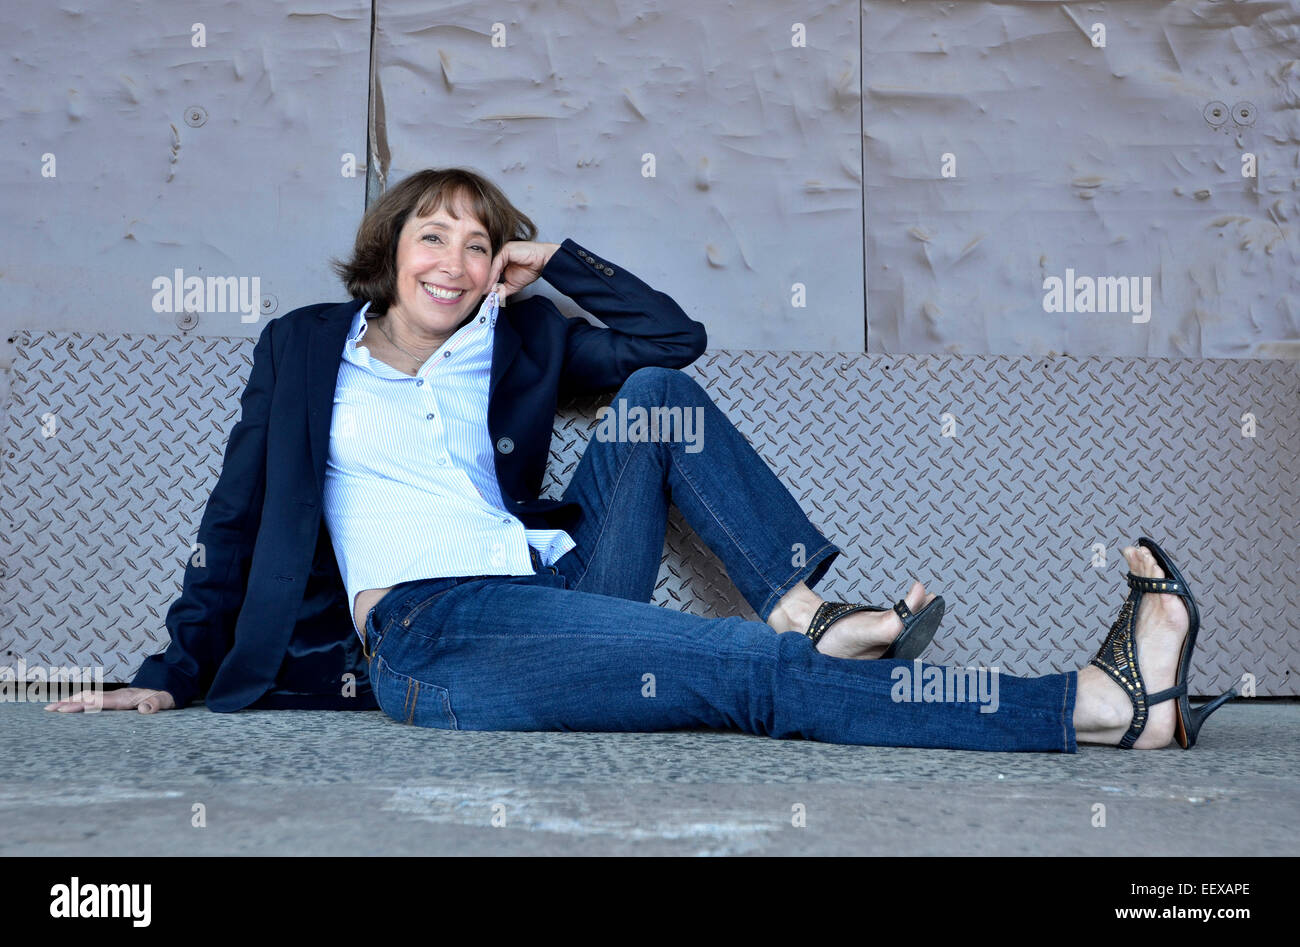 Didi Conn is starring as 'Gertrude,' in Steve Martin's adaptation of 'The Underpants' at the Long Wharf Theater. Stock Photo